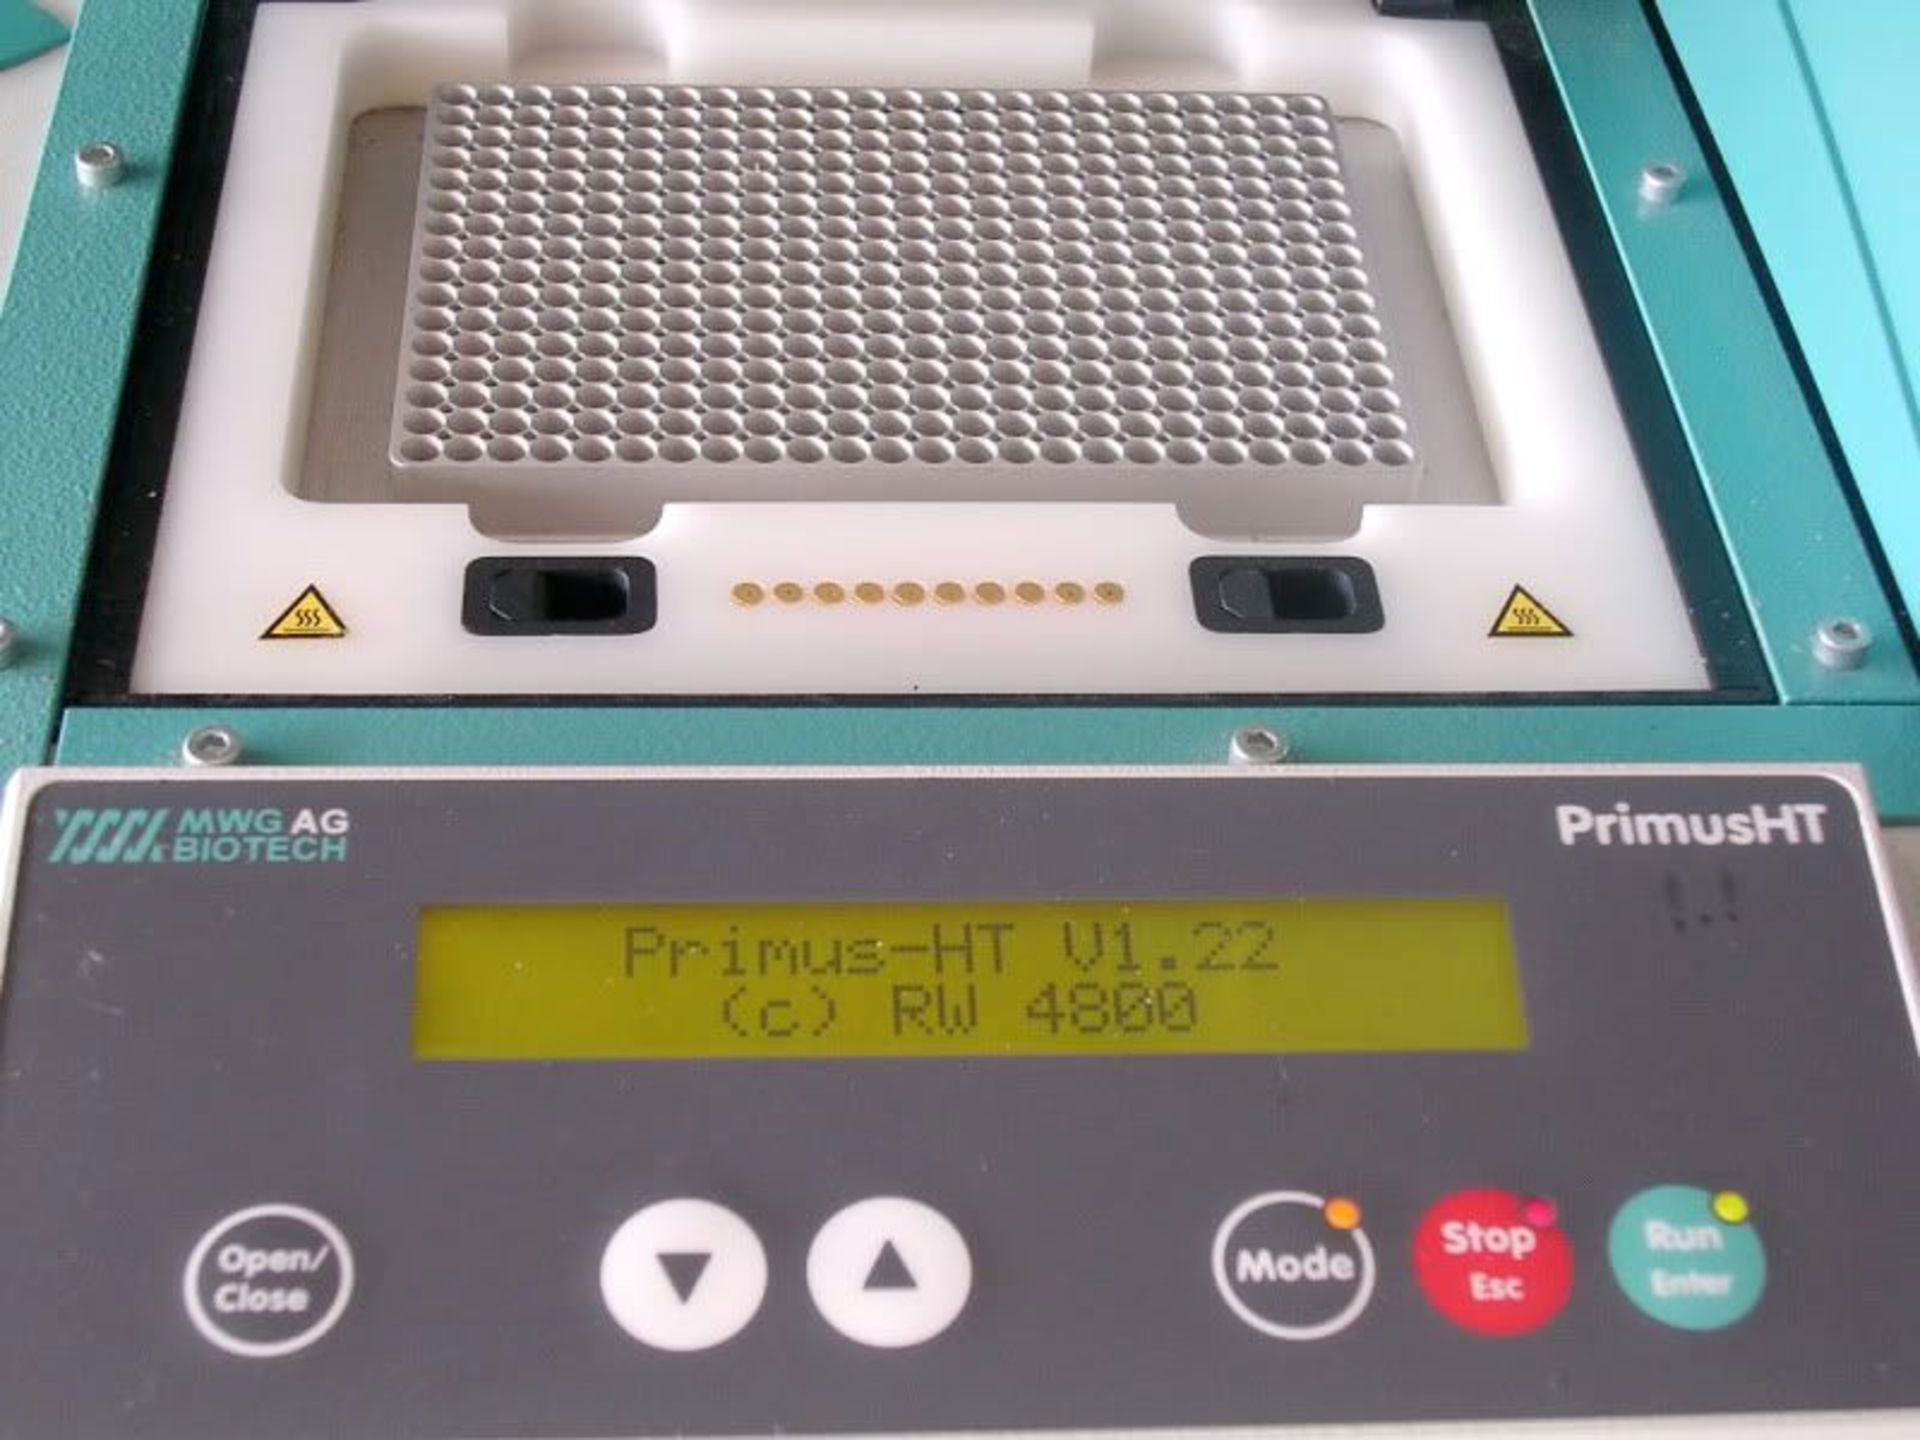 MWG AG Biotech, Primus HT Dual Thermal Cycler HTD PCR, Qty 1, 331261955760 - Image 3 of 8